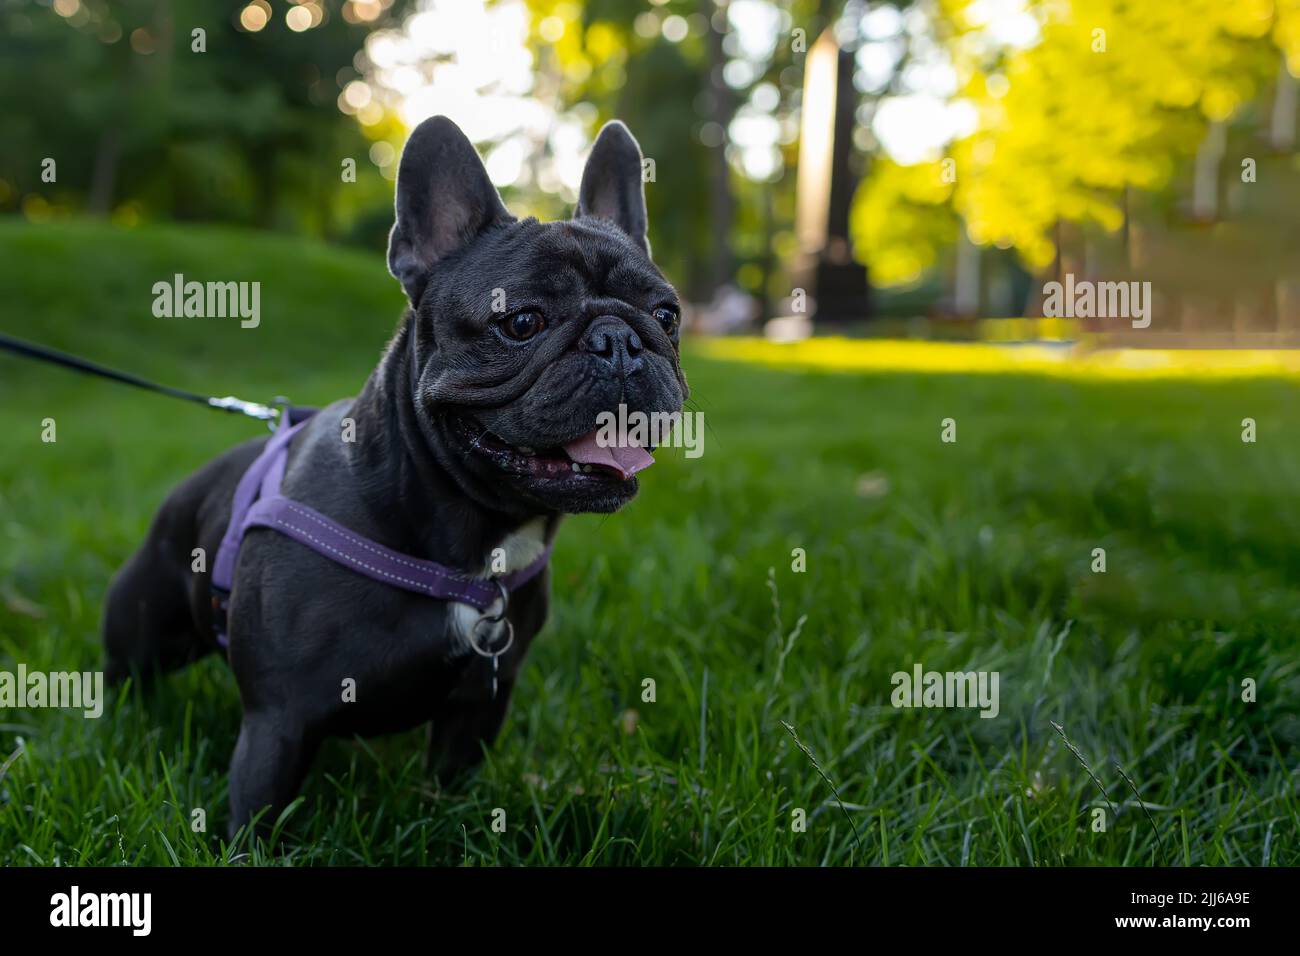 beautiful dog breed french bulldog pricked up and looks intently to the side Stock Photo